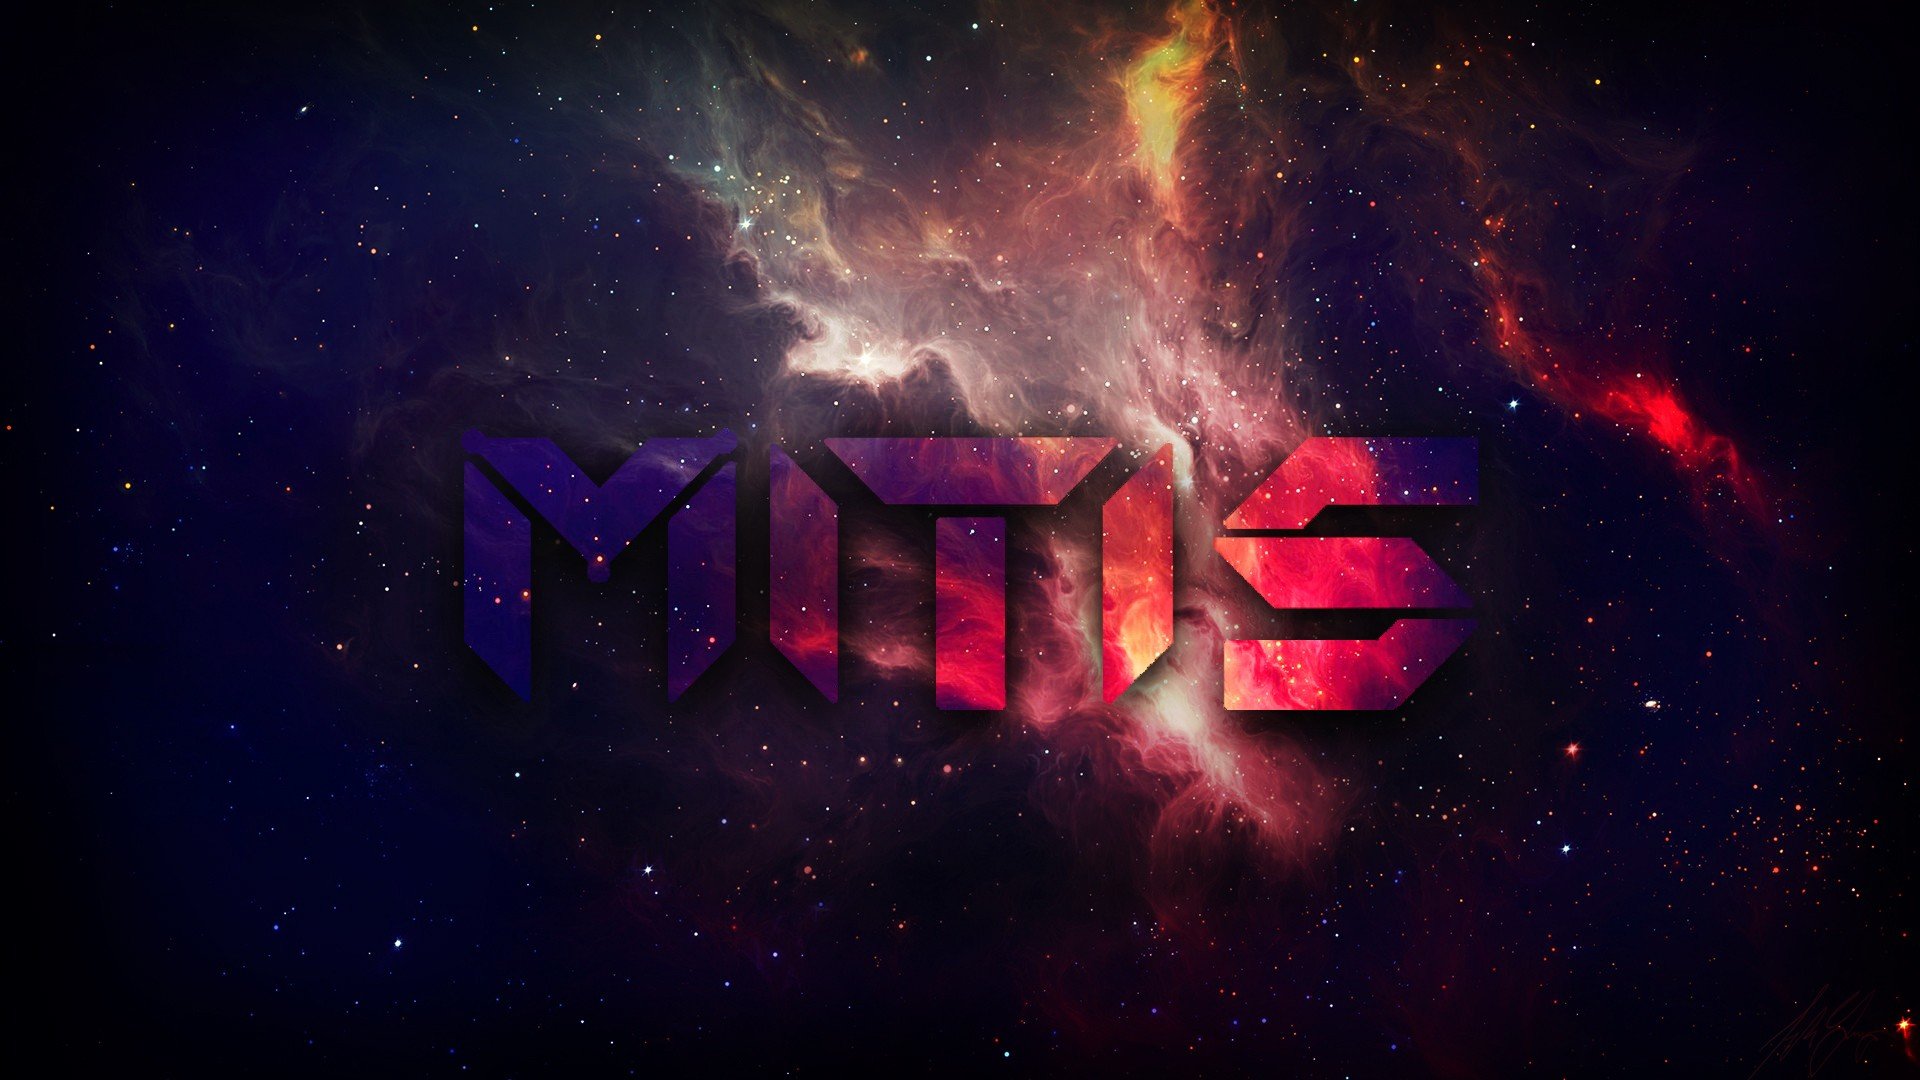 Mitis Hd Wallpapers Desktop And Mobile Images Photos Images, Photos, Reviews